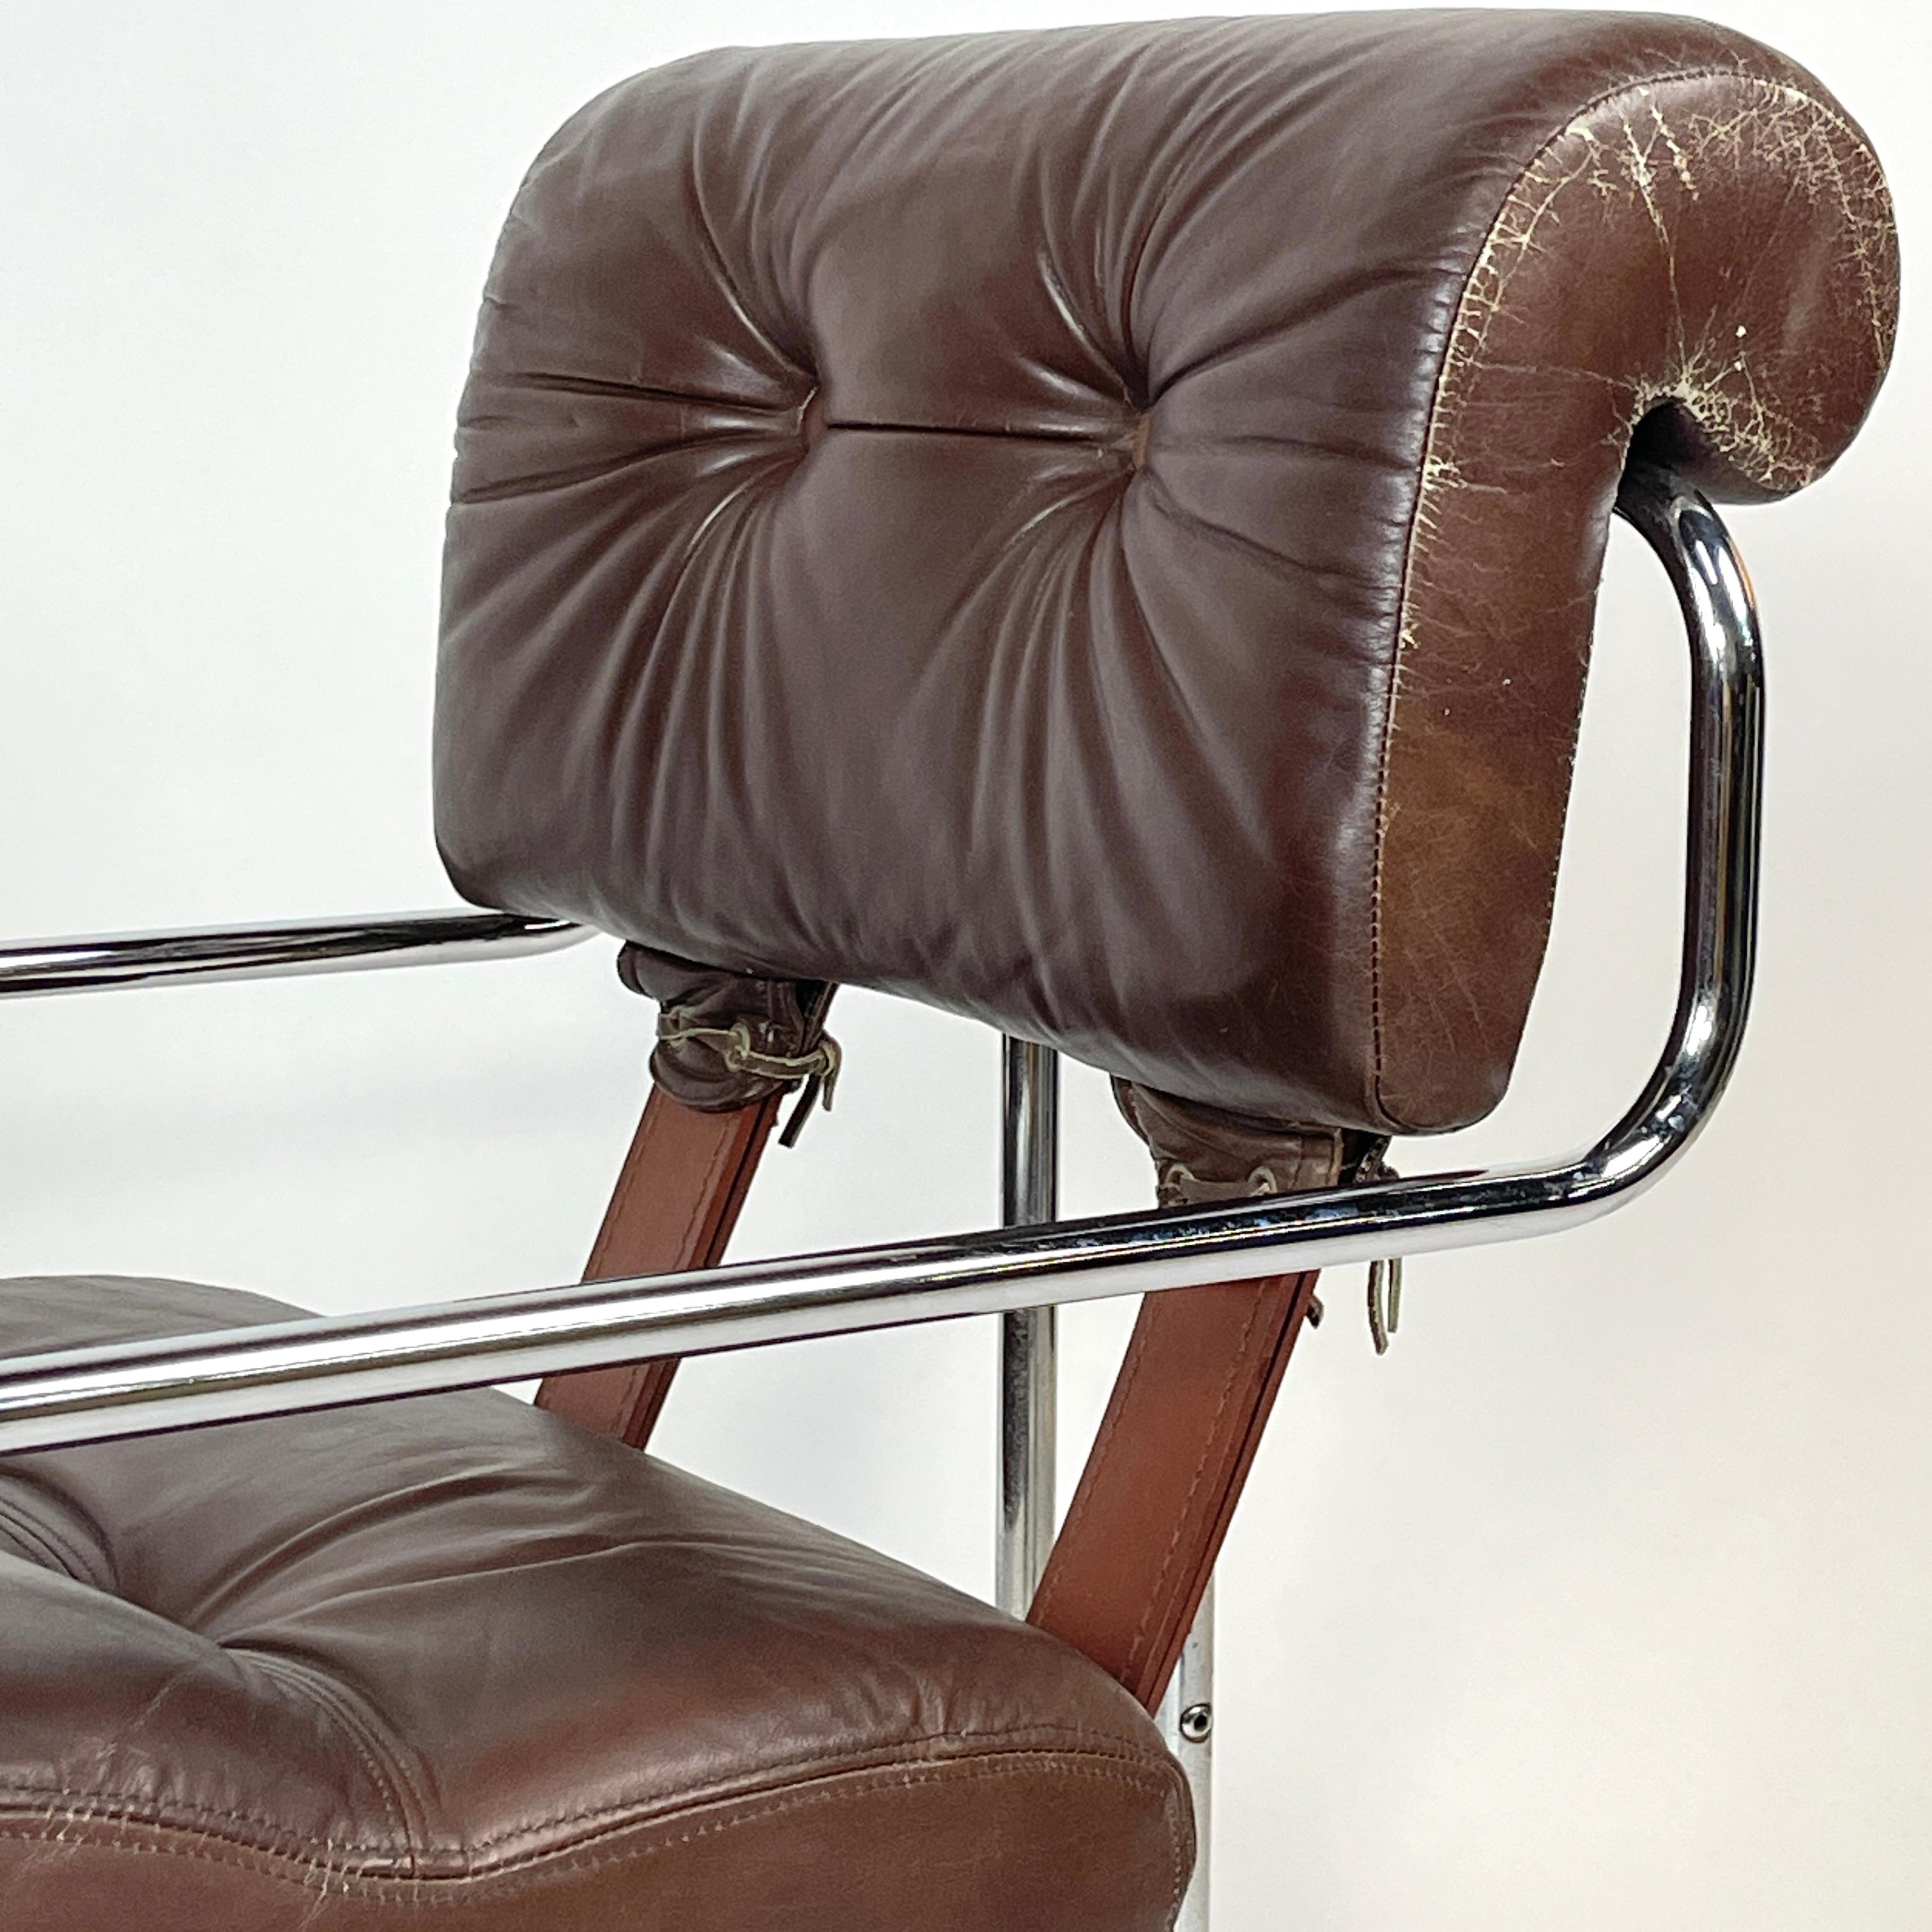 Pace Guido Faleschini 'Tucroma' Sculptural Leather & Chrome Chair Postmodern 1